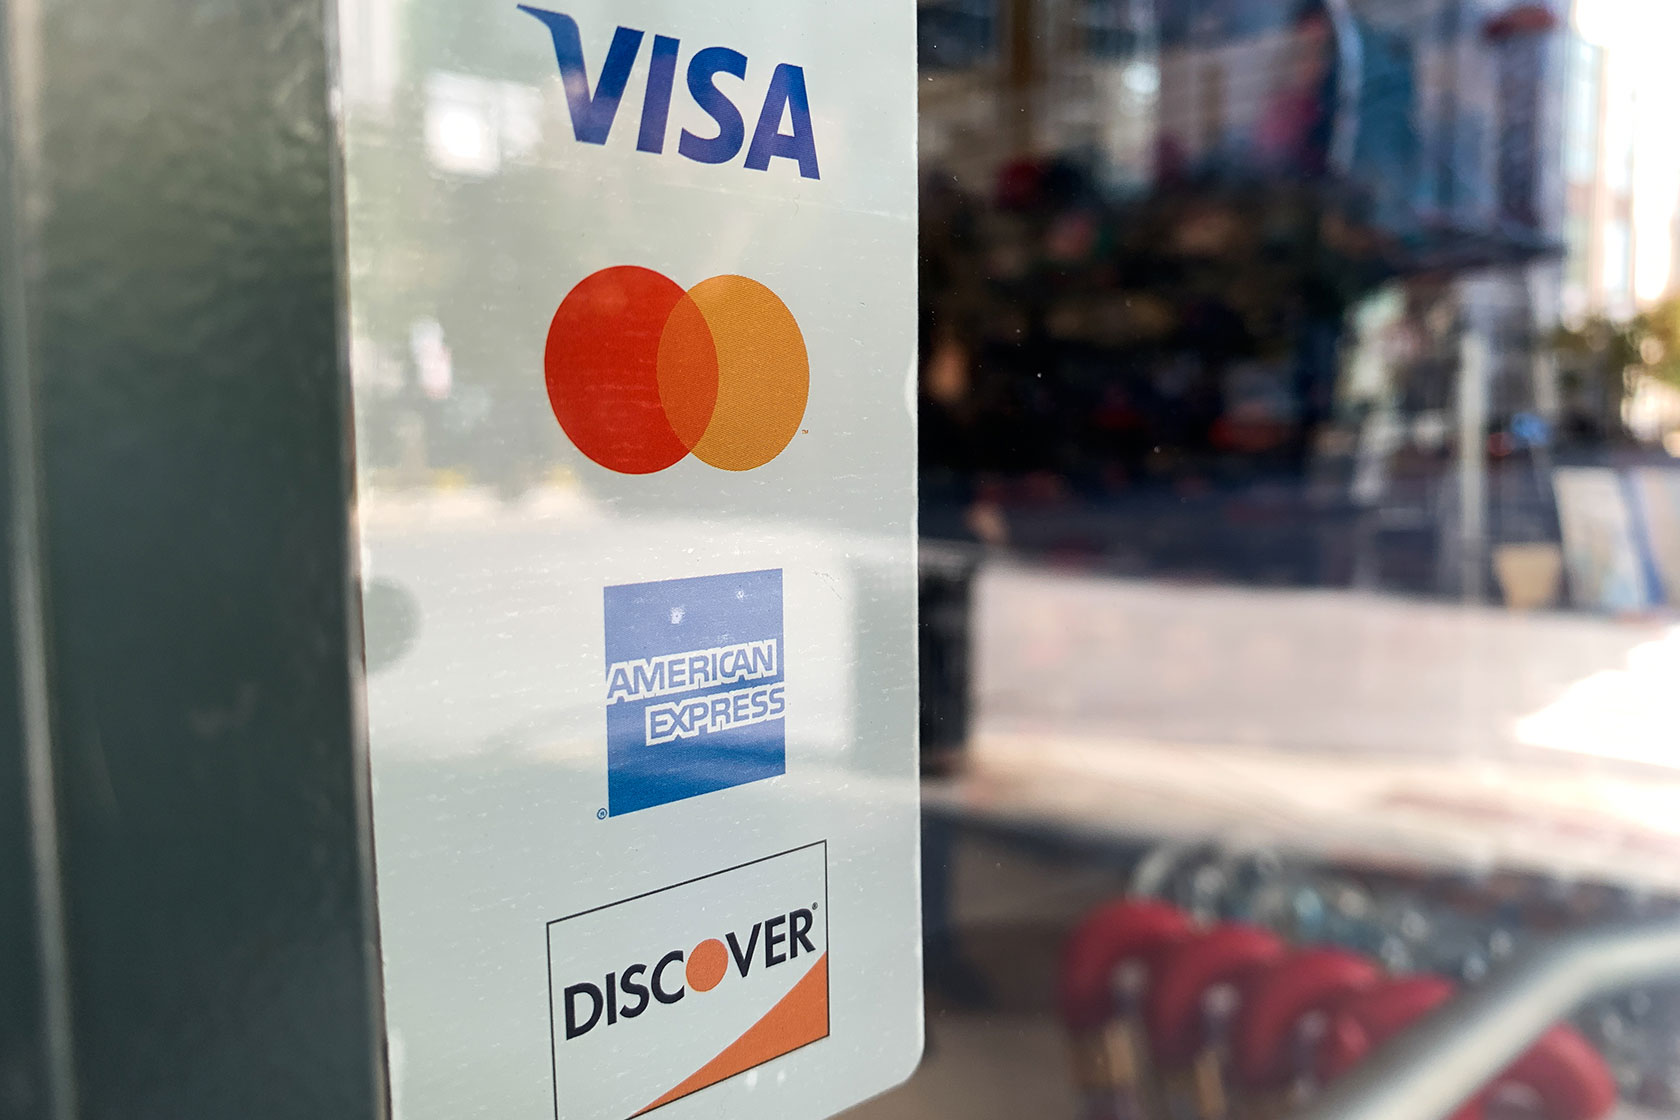 A sticker with credit card companies is seen at a shop in Chicago.